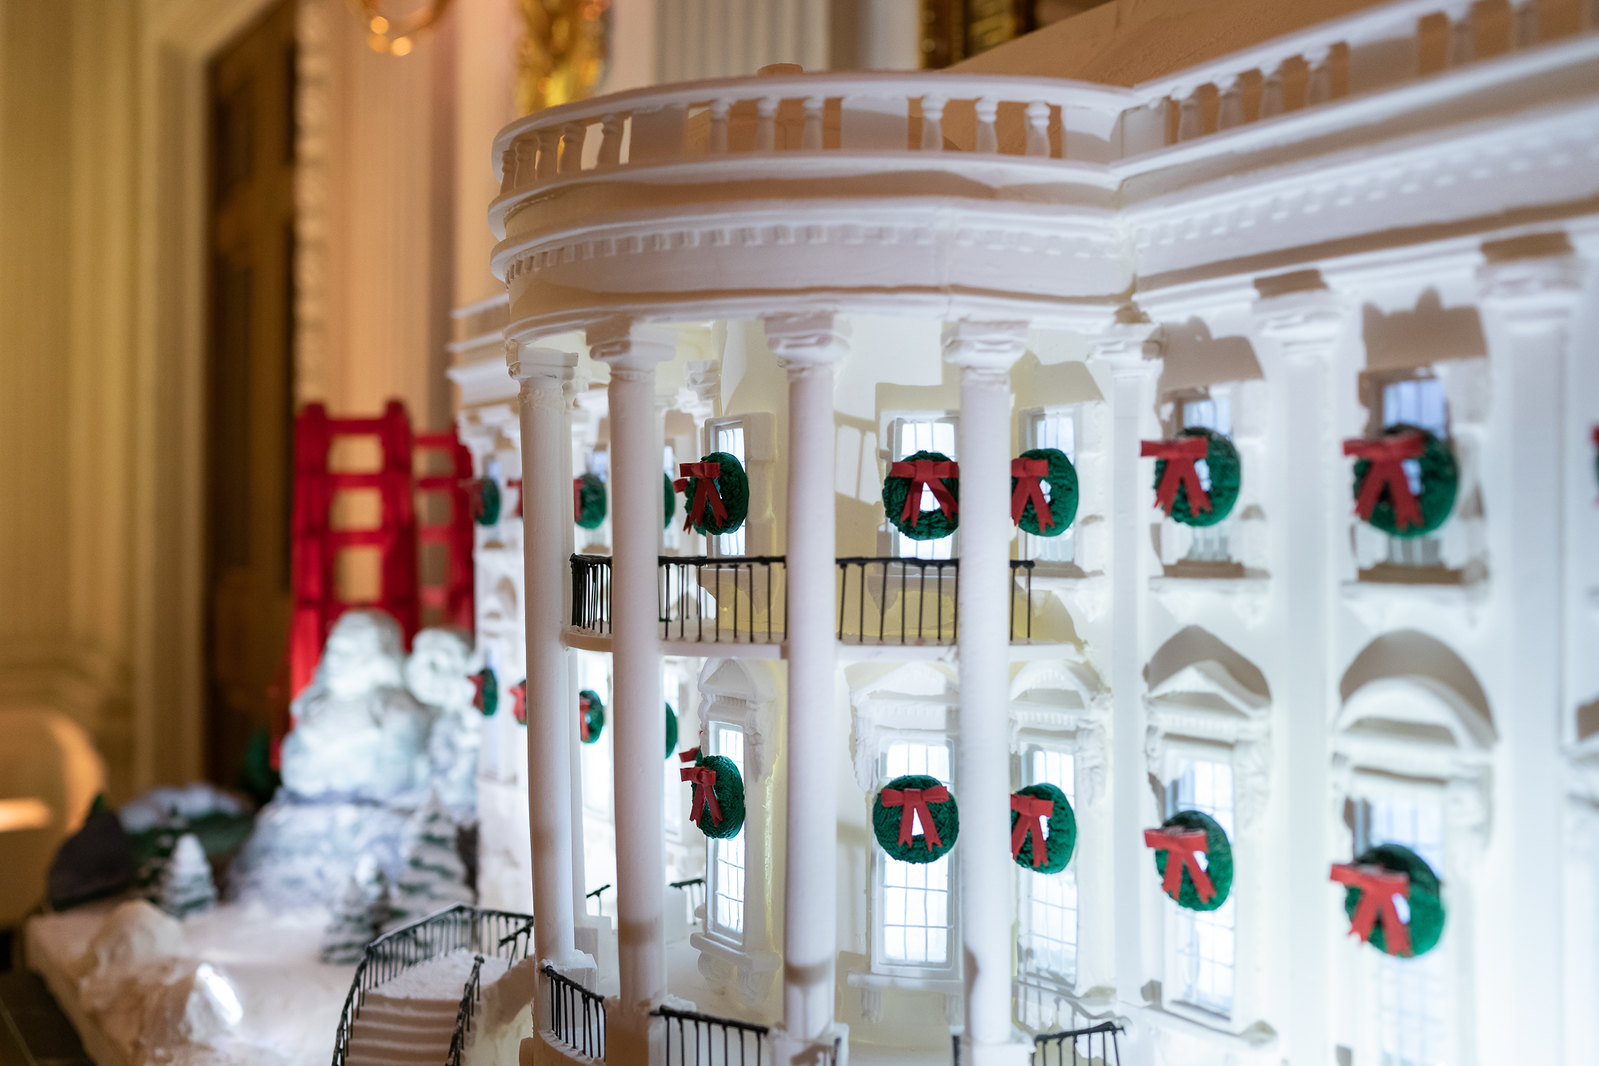 Scale model of the White House decorated for Christmas